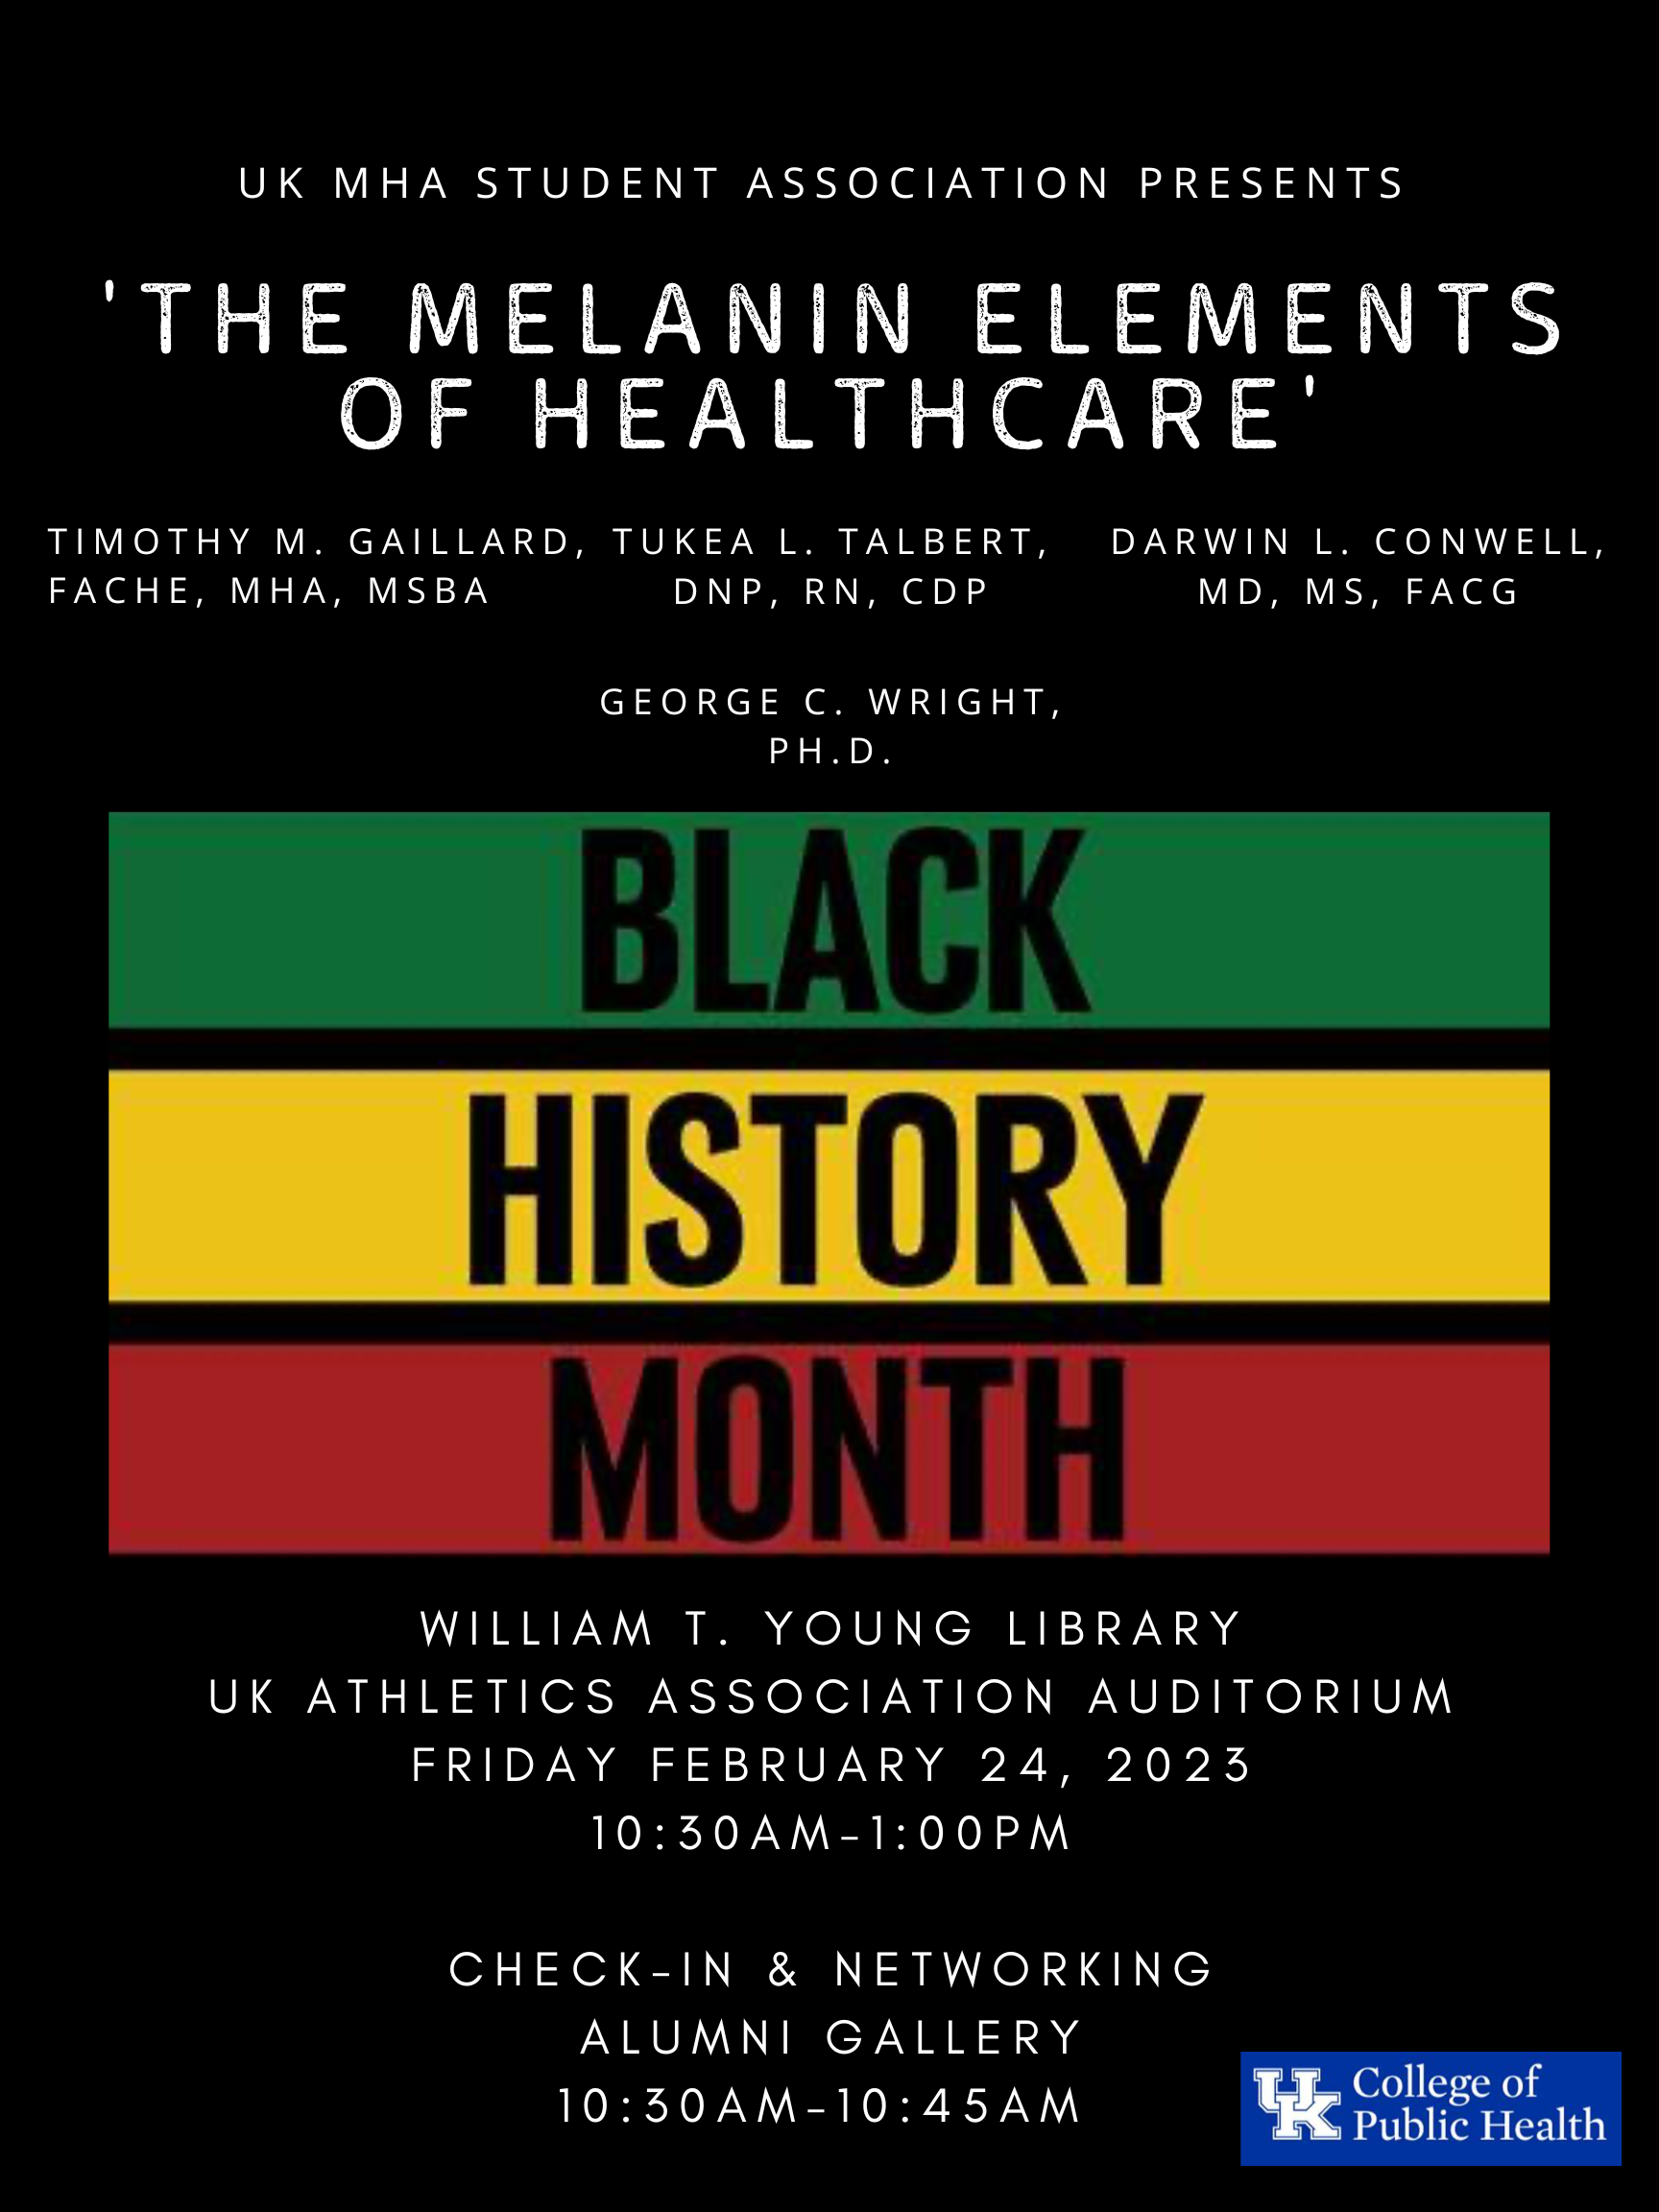 Event flyer for the UK MHA student association presents Black History Month: The Melanin Elements of Healthcare